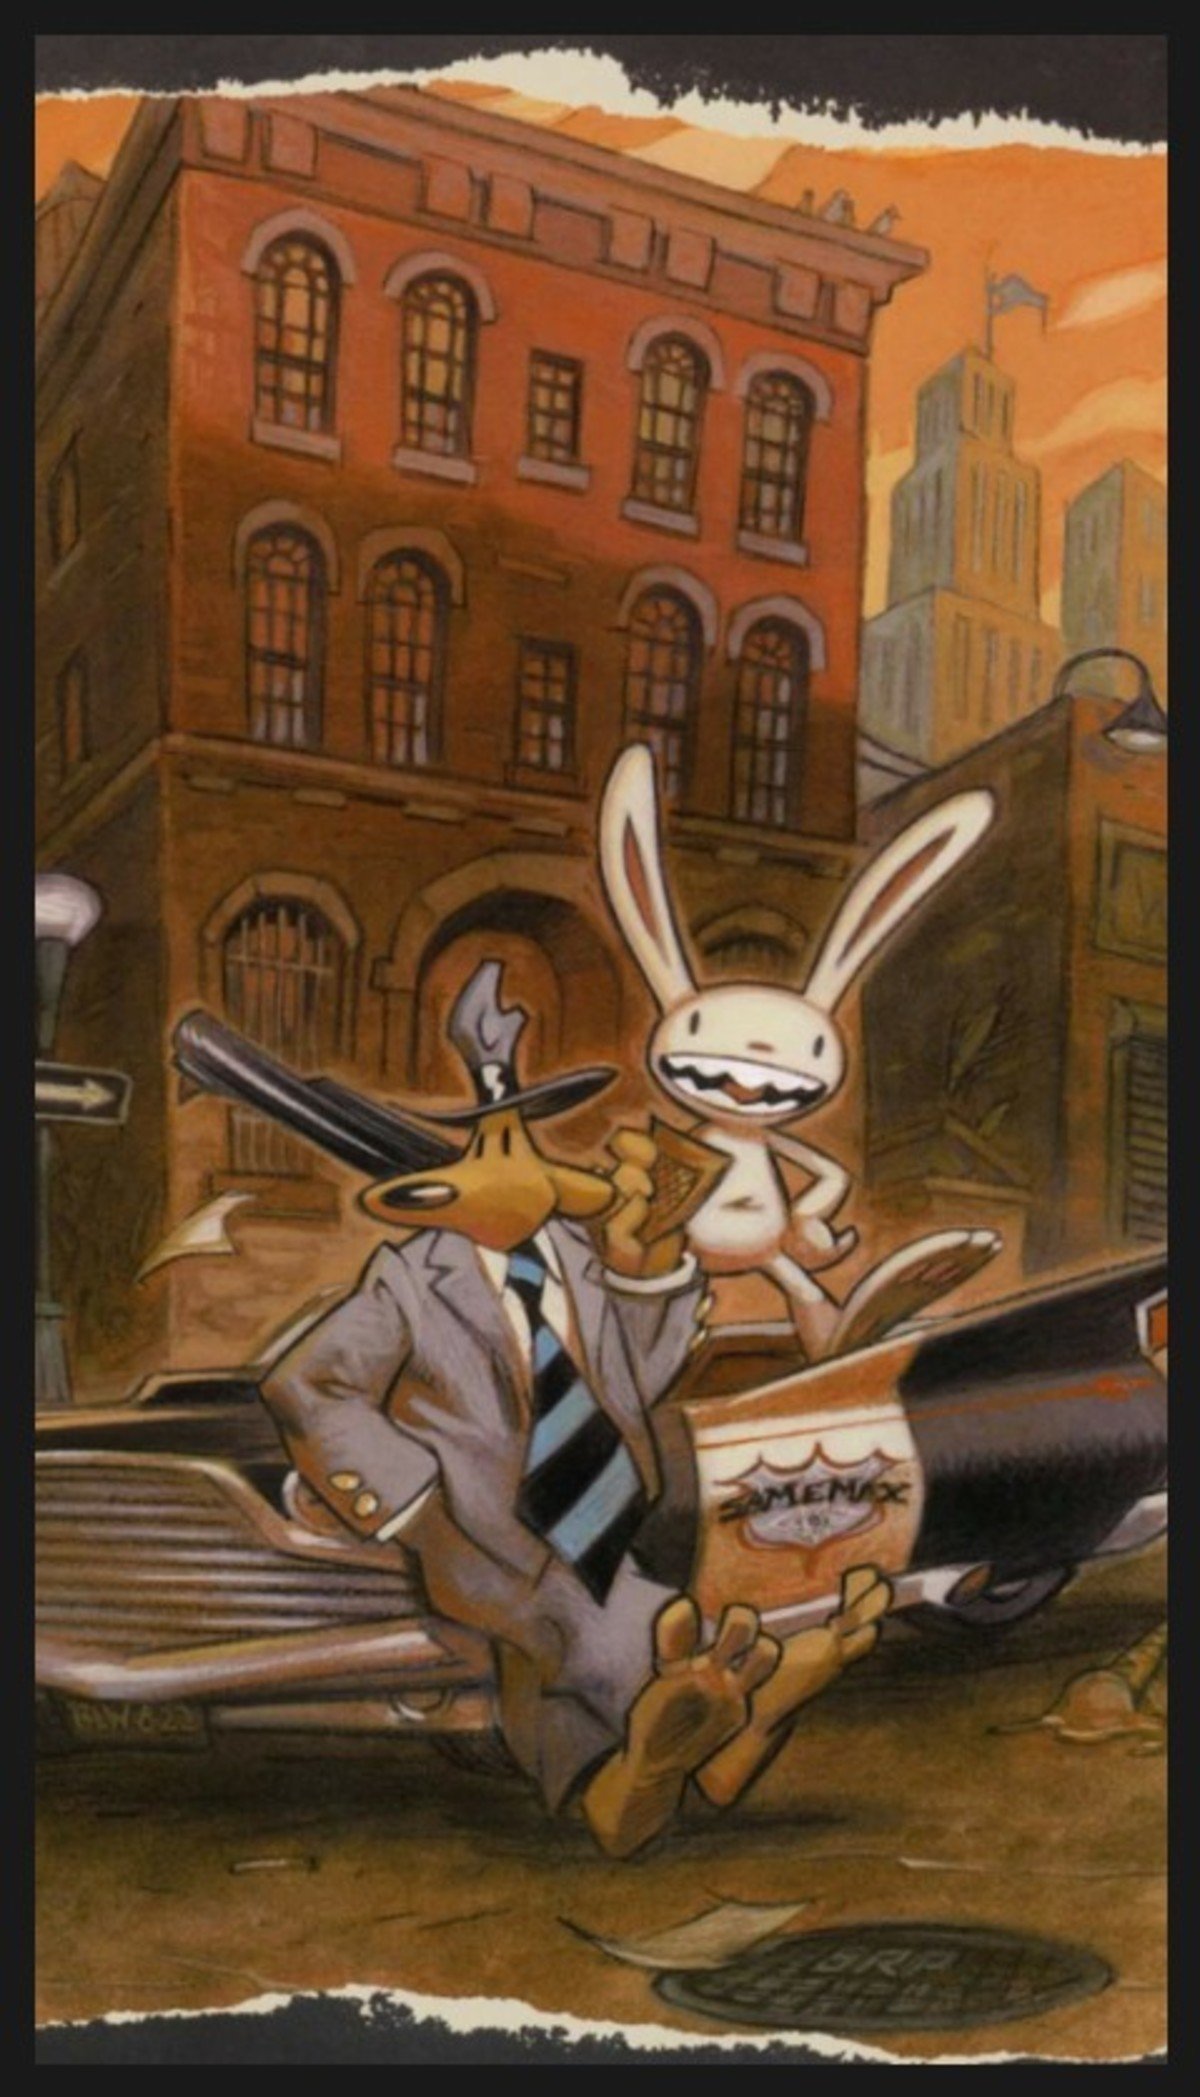 Max of Sam and Max Wallpaper by bdell on DeviantArt